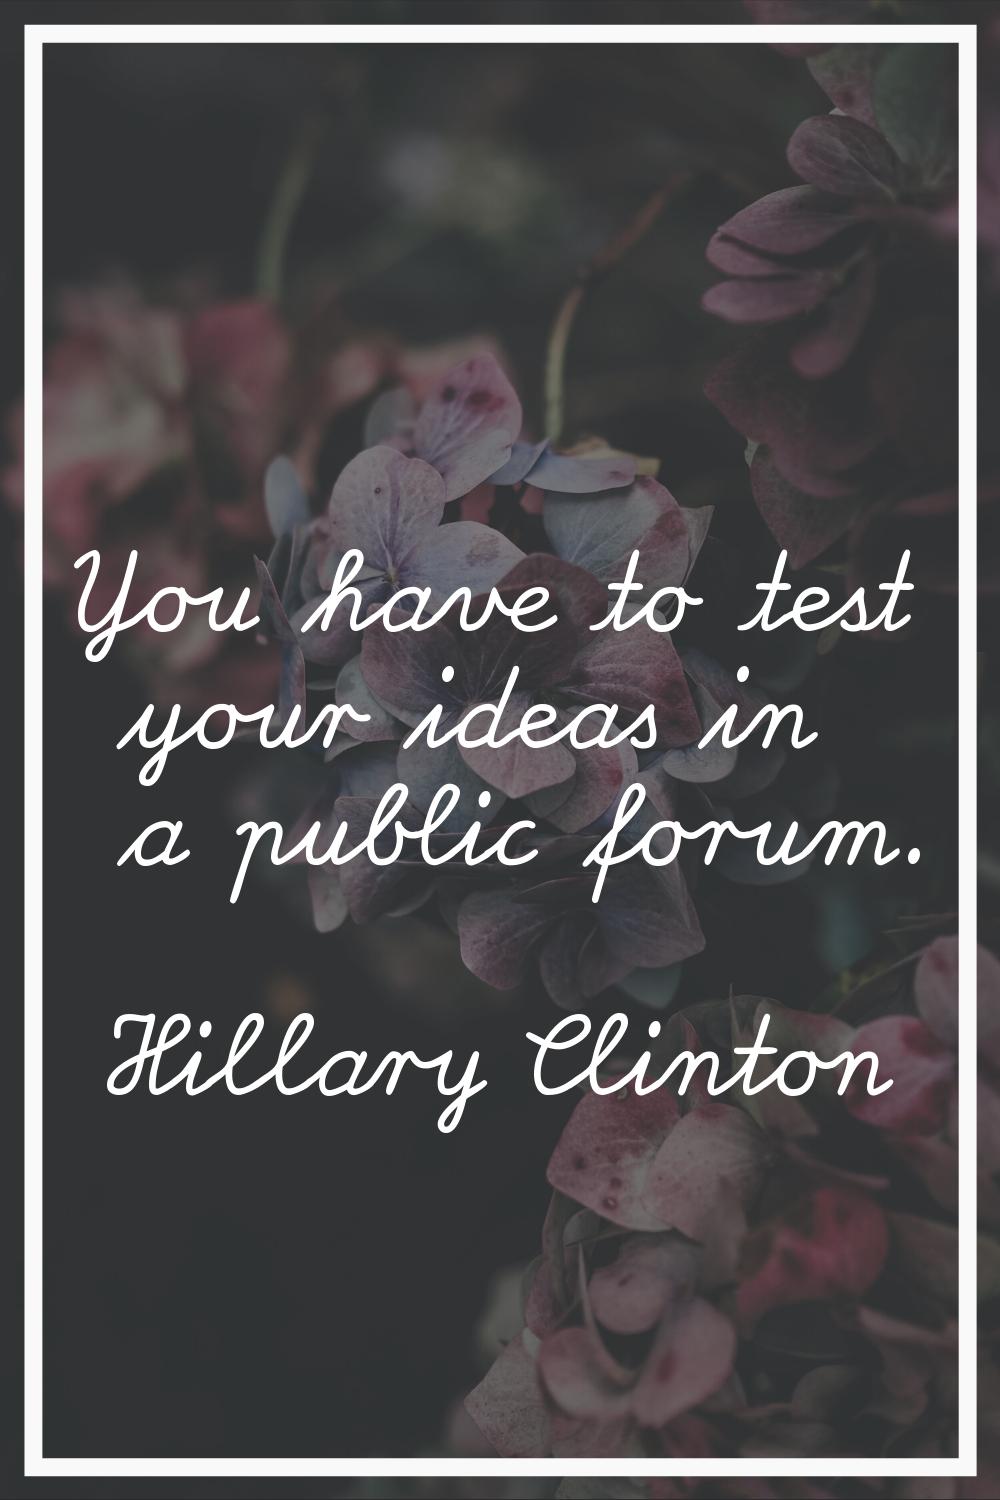 You have to test your ideas in a public forum.